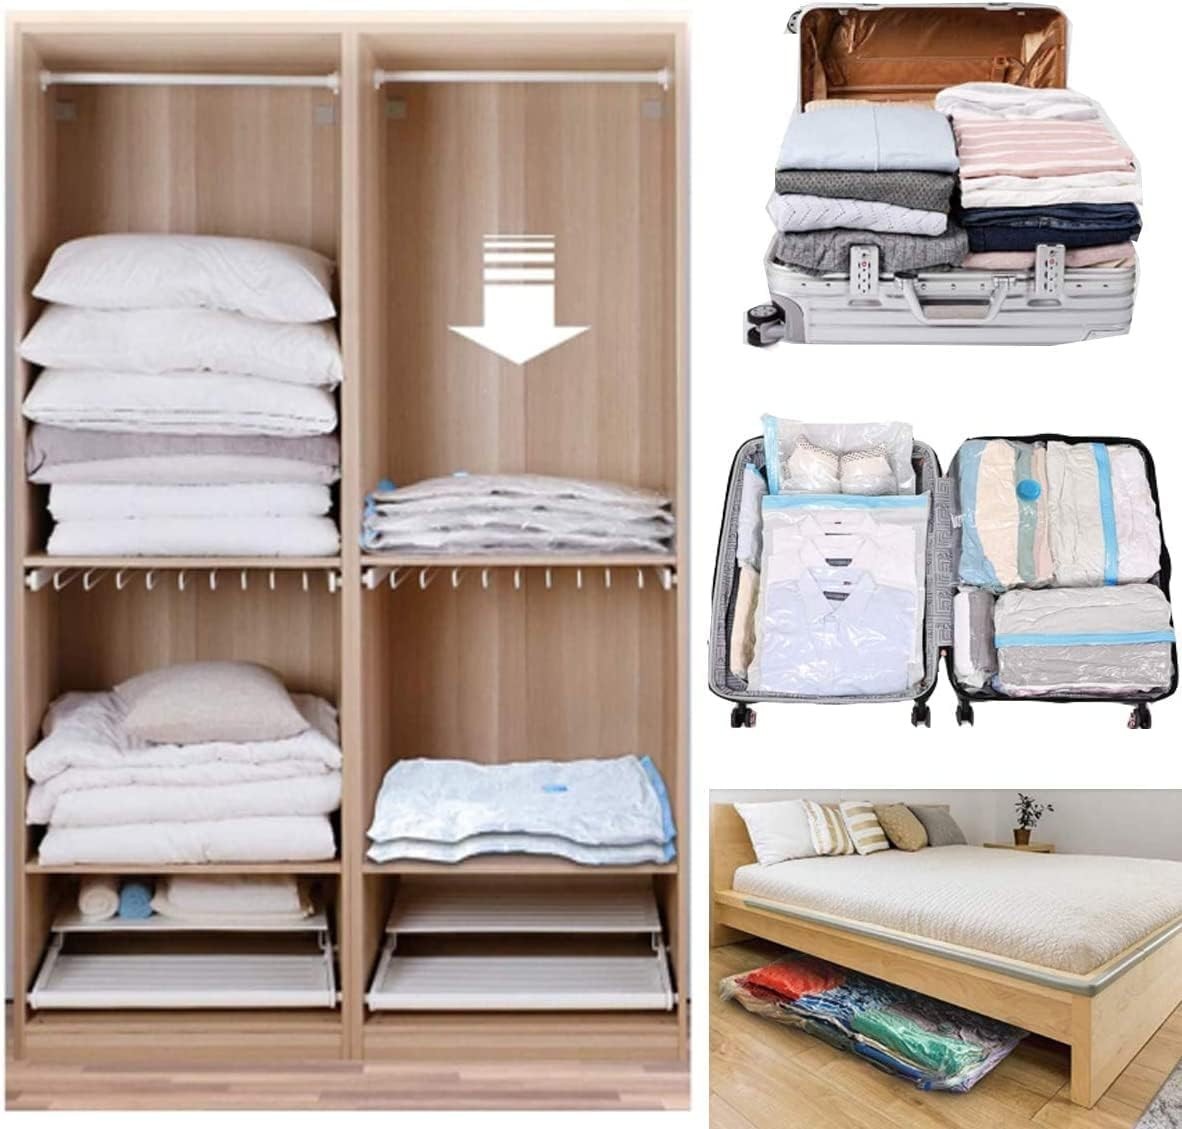 2 sheets set vacuum bag 80×100cm clothes futon compression bag vacuum cleaner correspondence vacuum pack moth repellent mold proofing dustproof .. storage /. change / travel closet storing repetition use taking place 